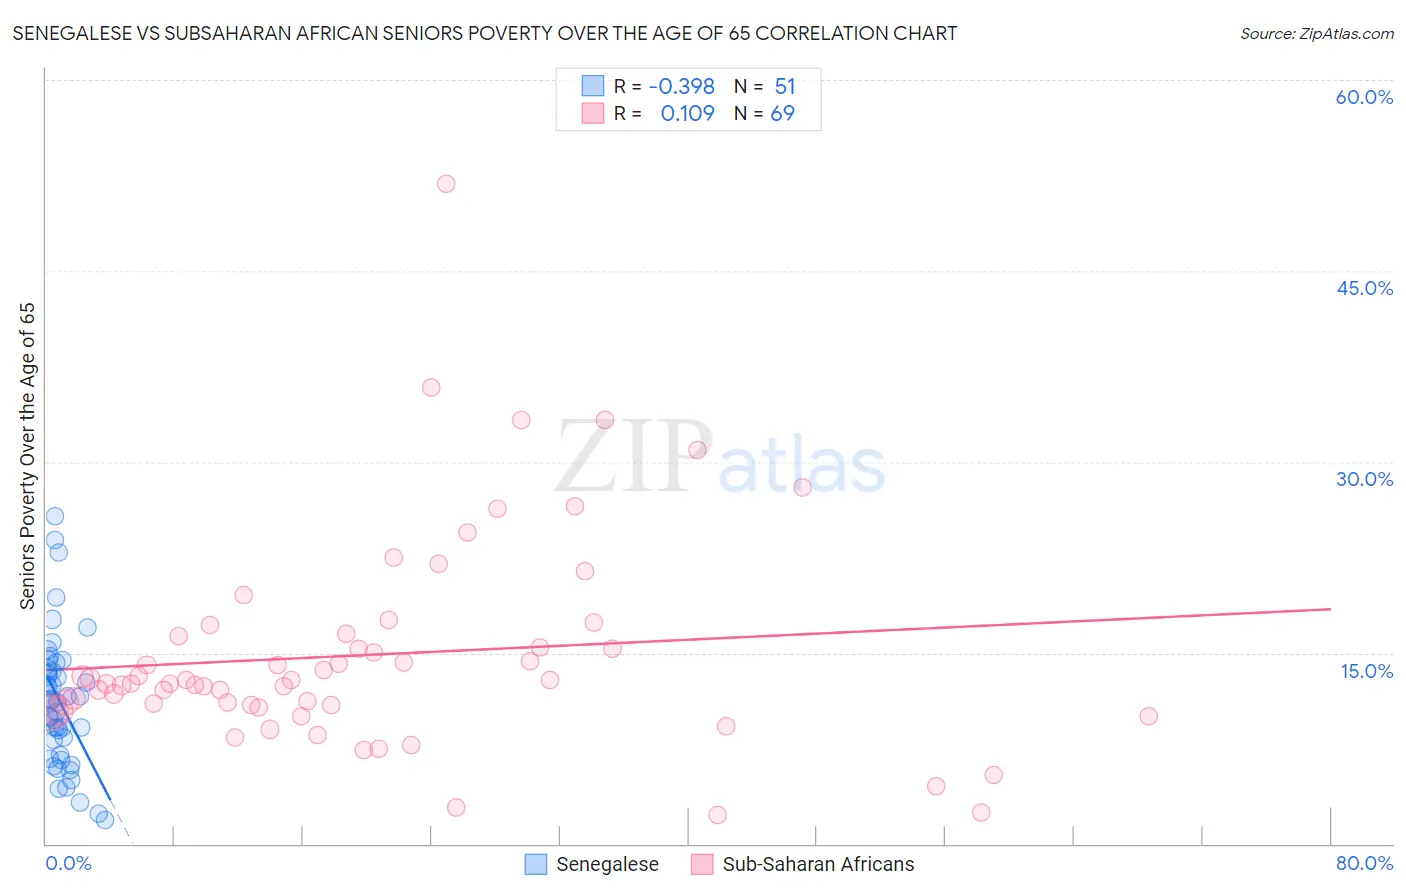 Senegalese vs Subsaharan African Seniors Poverty Over the Age of 65